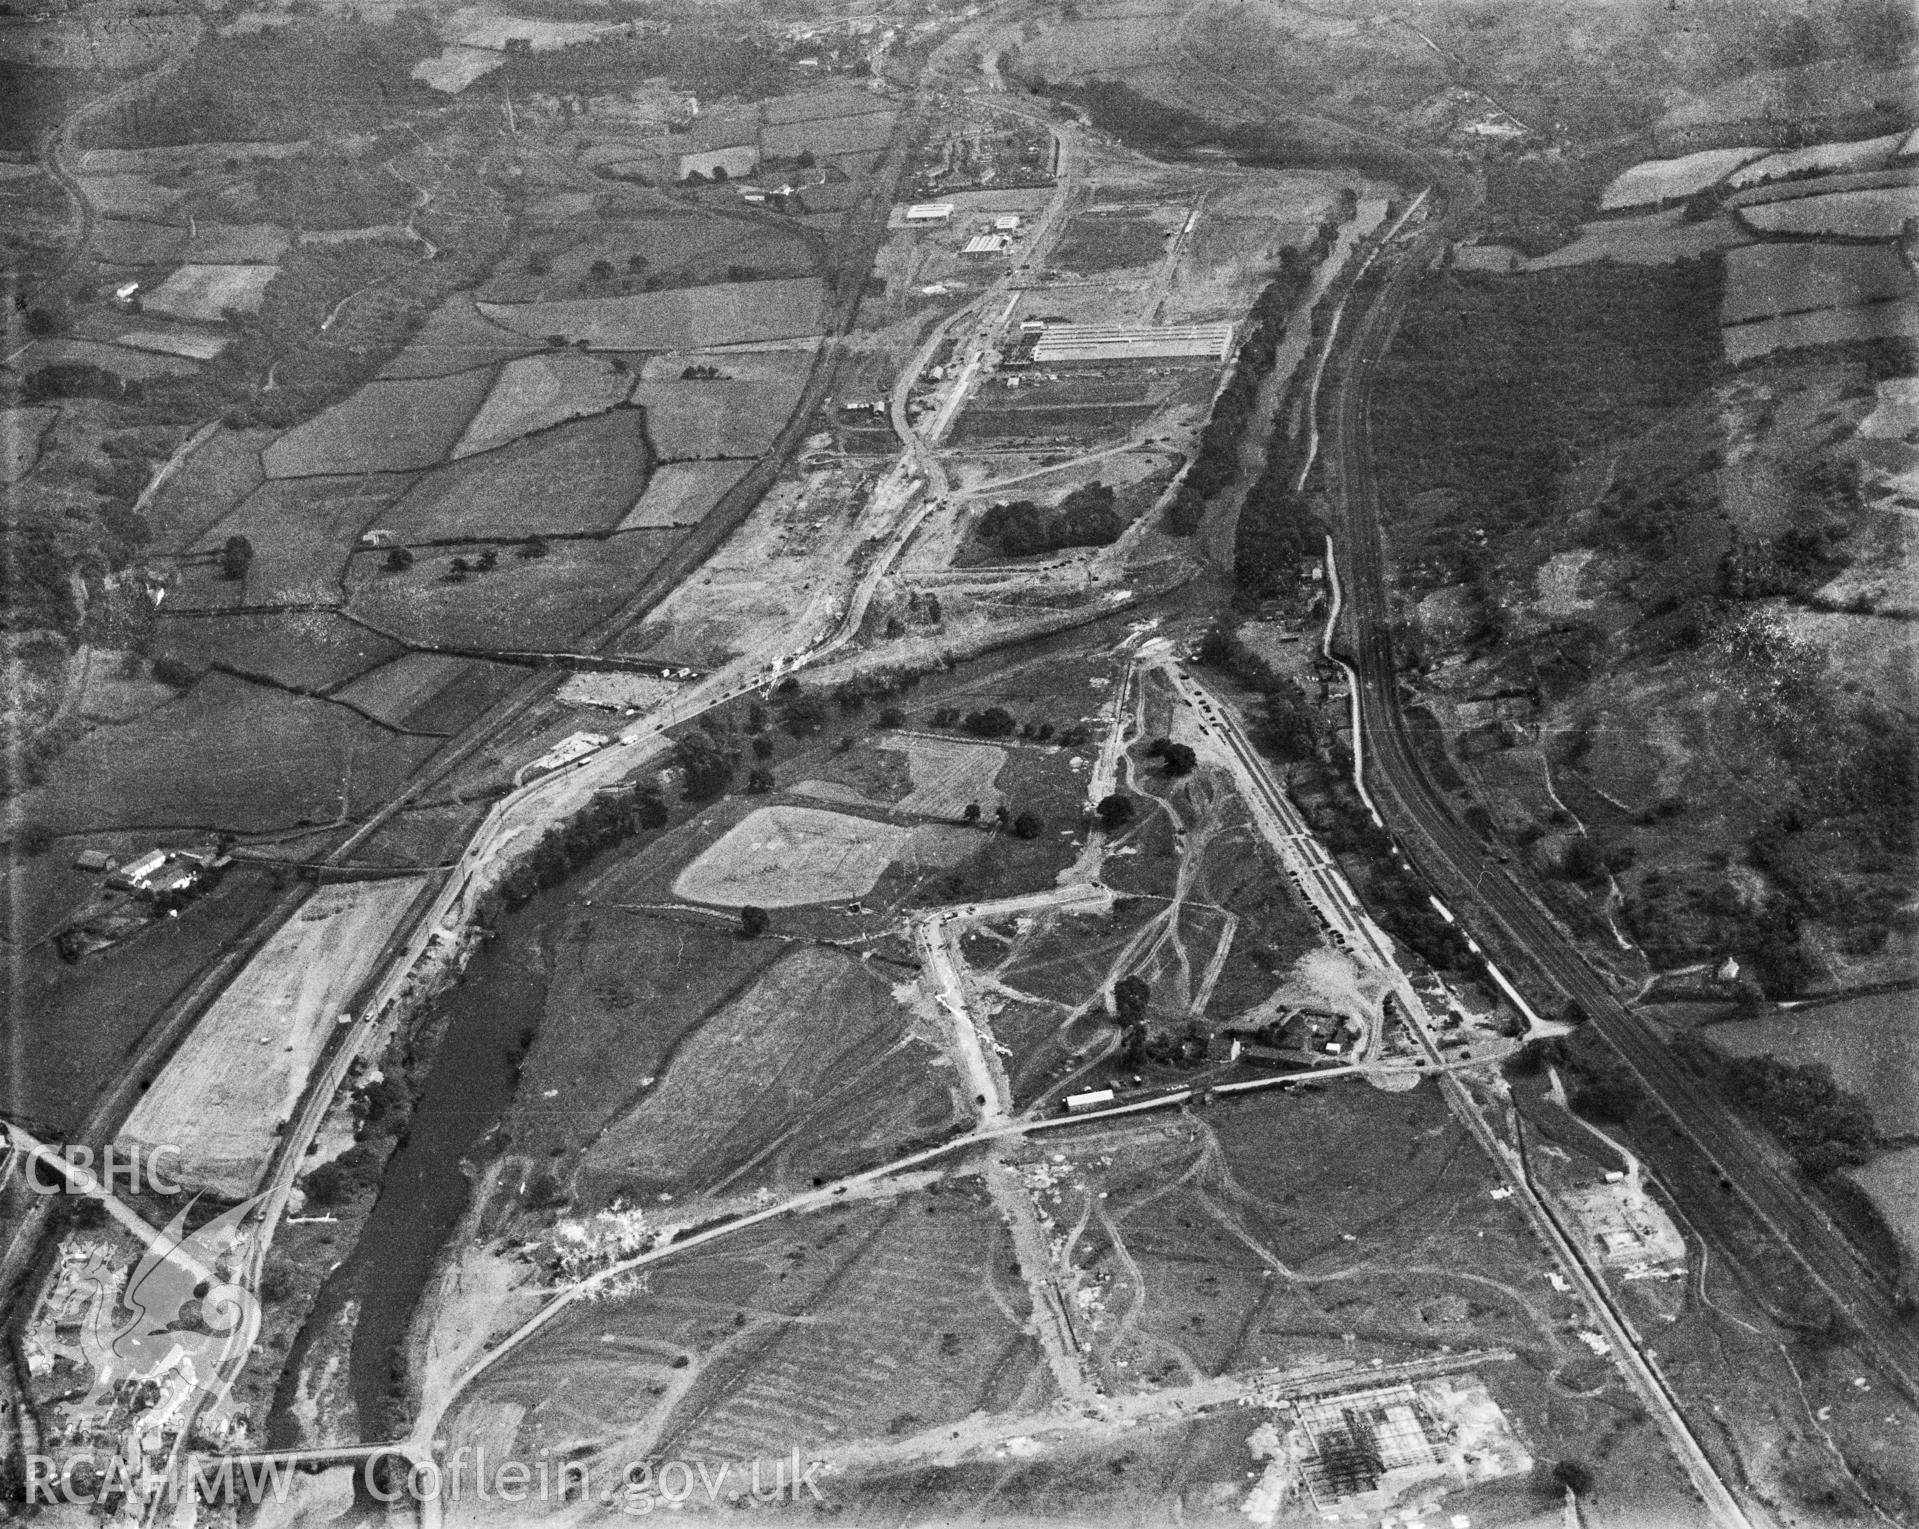 Black and white oblique aerial photograph showing Treforest Trading Estate, from Aerofilms album Glamorgan S-Z (W29). View of the estate looking south-east in 1937. At this point in the Taff Valley were, from east to west, the Alexandra Railway, the disused Glamorganshire Canal, Nantgarw Colliery, the dismantled Cardiff Railway, the A470 North-South Trunk Road, seen in this section as a dual carriageway, the buildings of the trading estate, River Taff and the four-tracked Taff Vale Railway.